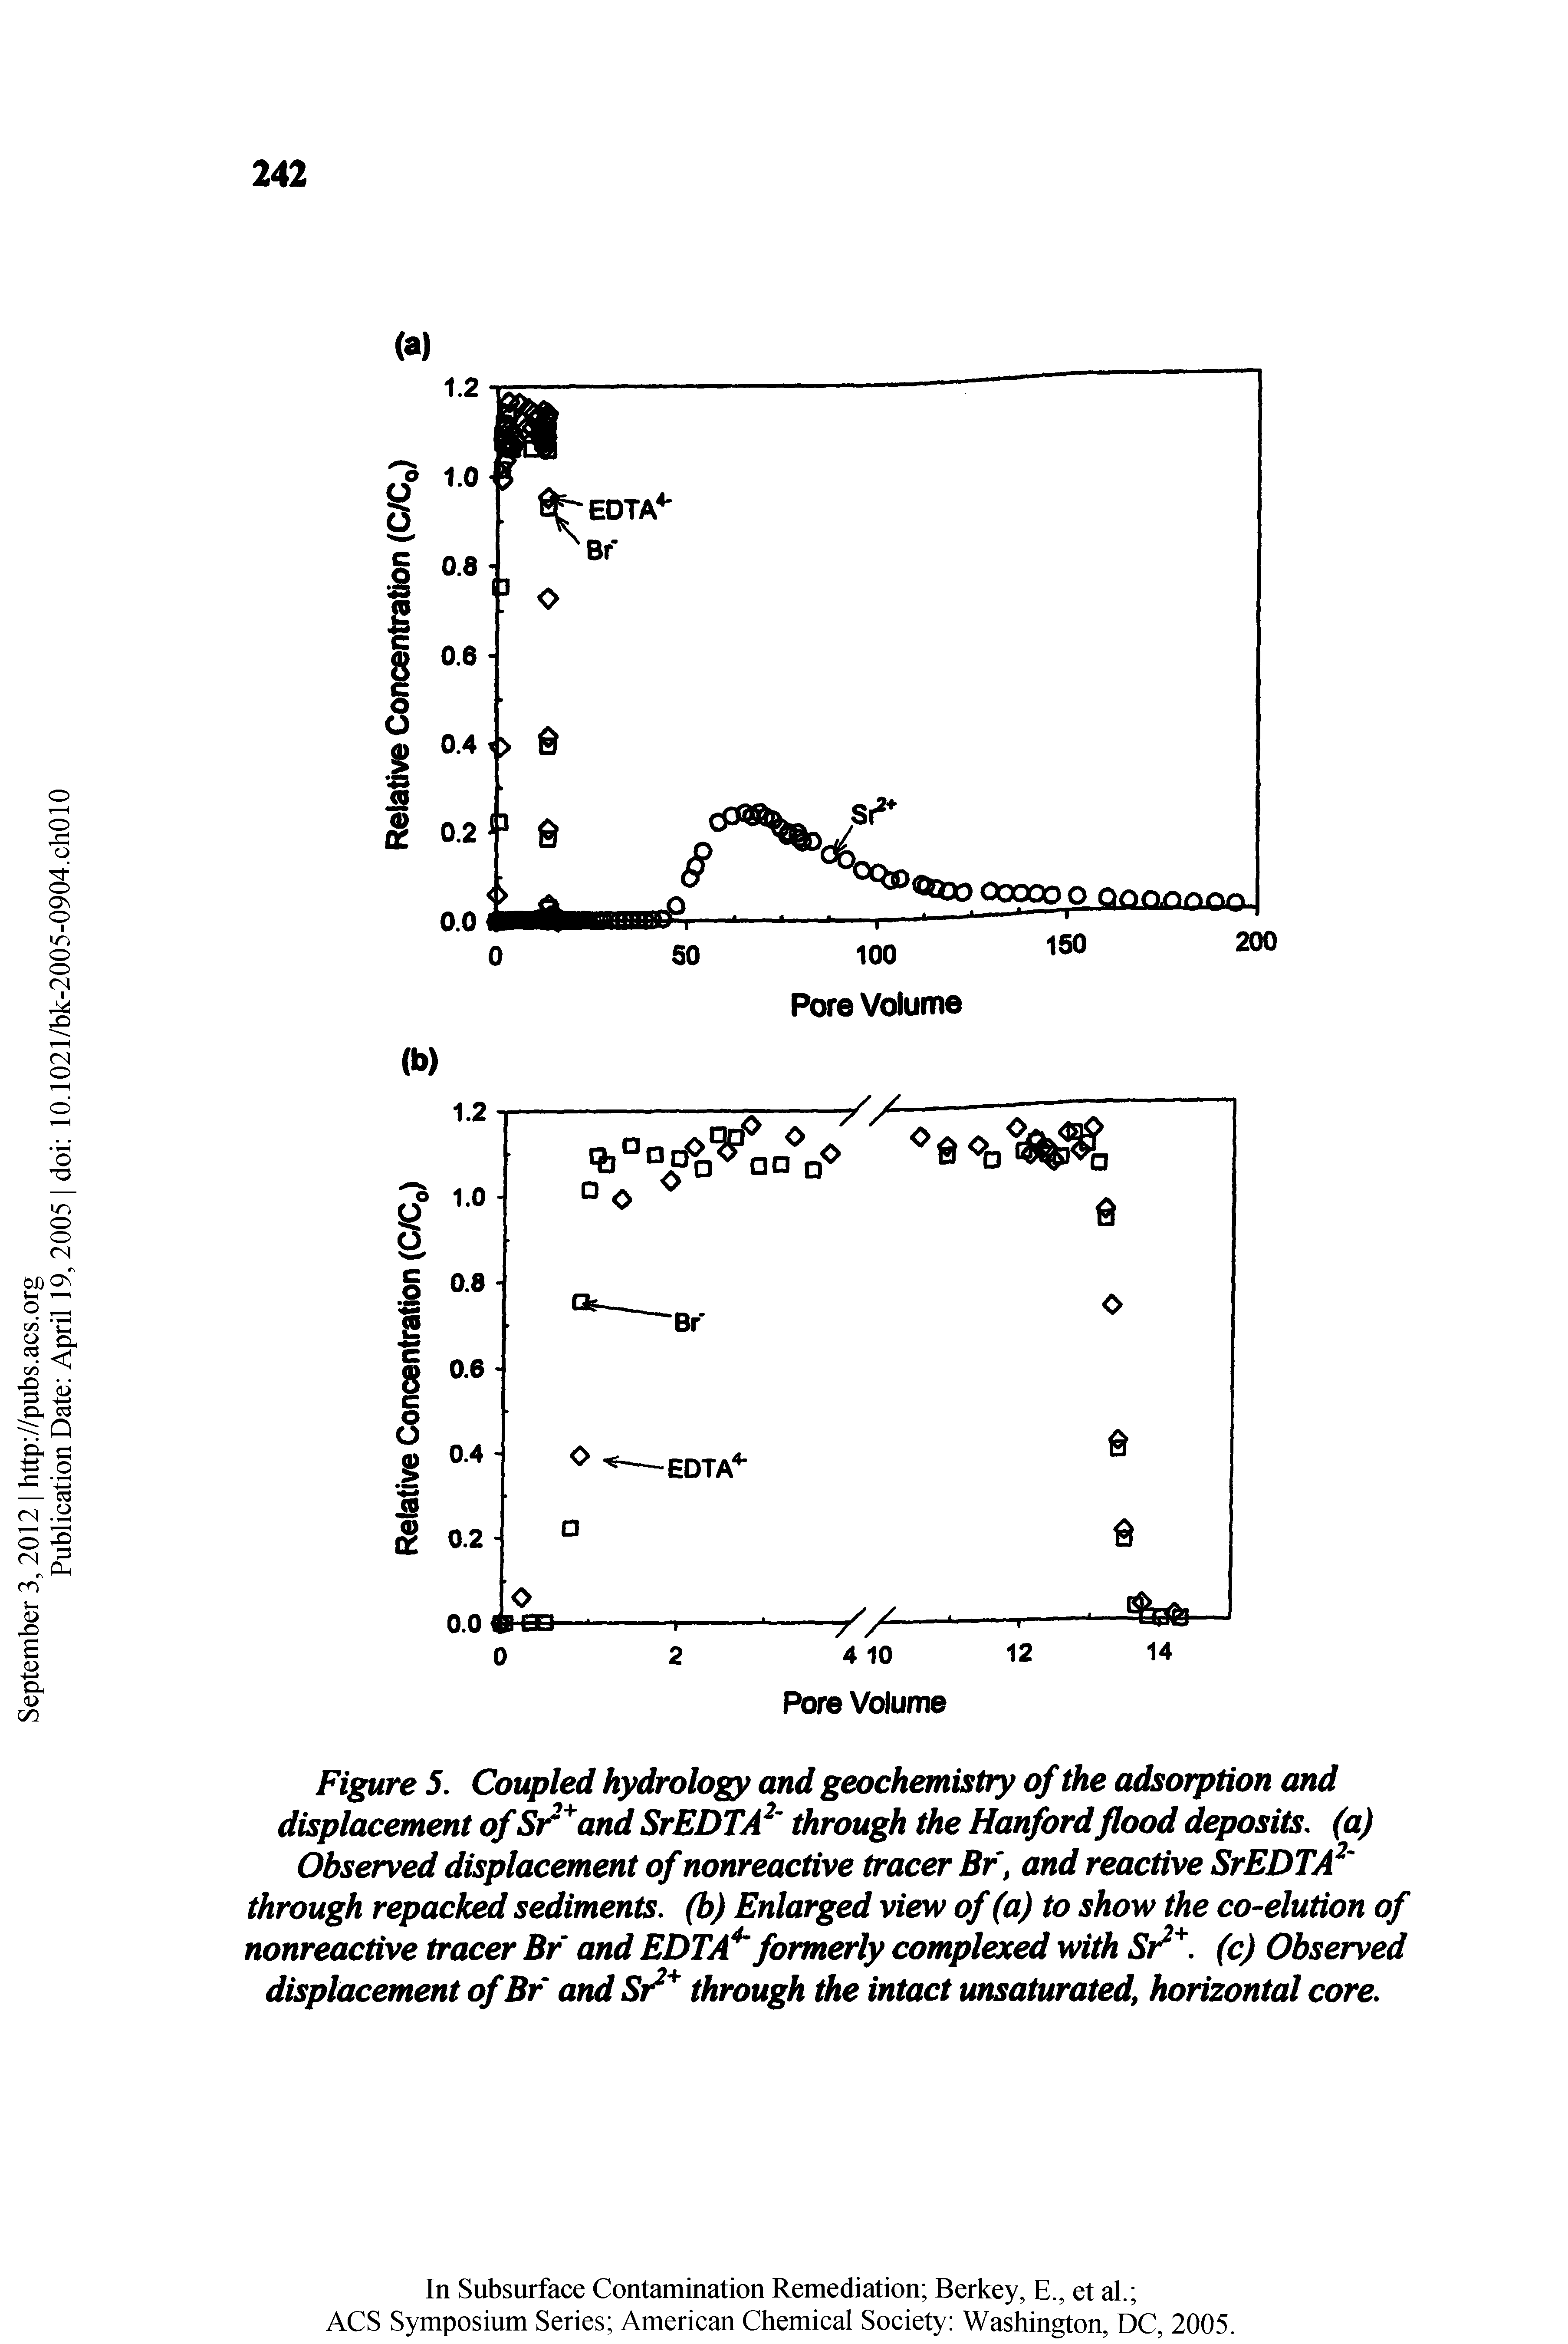 Figure 5. Coupled hydrology and geochemistry of the adsorption and displacement of Sr and SrEDTA through the Hanford flood deposits, (a) Observed displacement of nonreactive tracer Bf, and reactive SrEDTA through repacked sediments, (b) Enlarged view of (a) to show the co-elution of nonreactive tracer Br and EDTA" formerly complexed with (c) Observed...